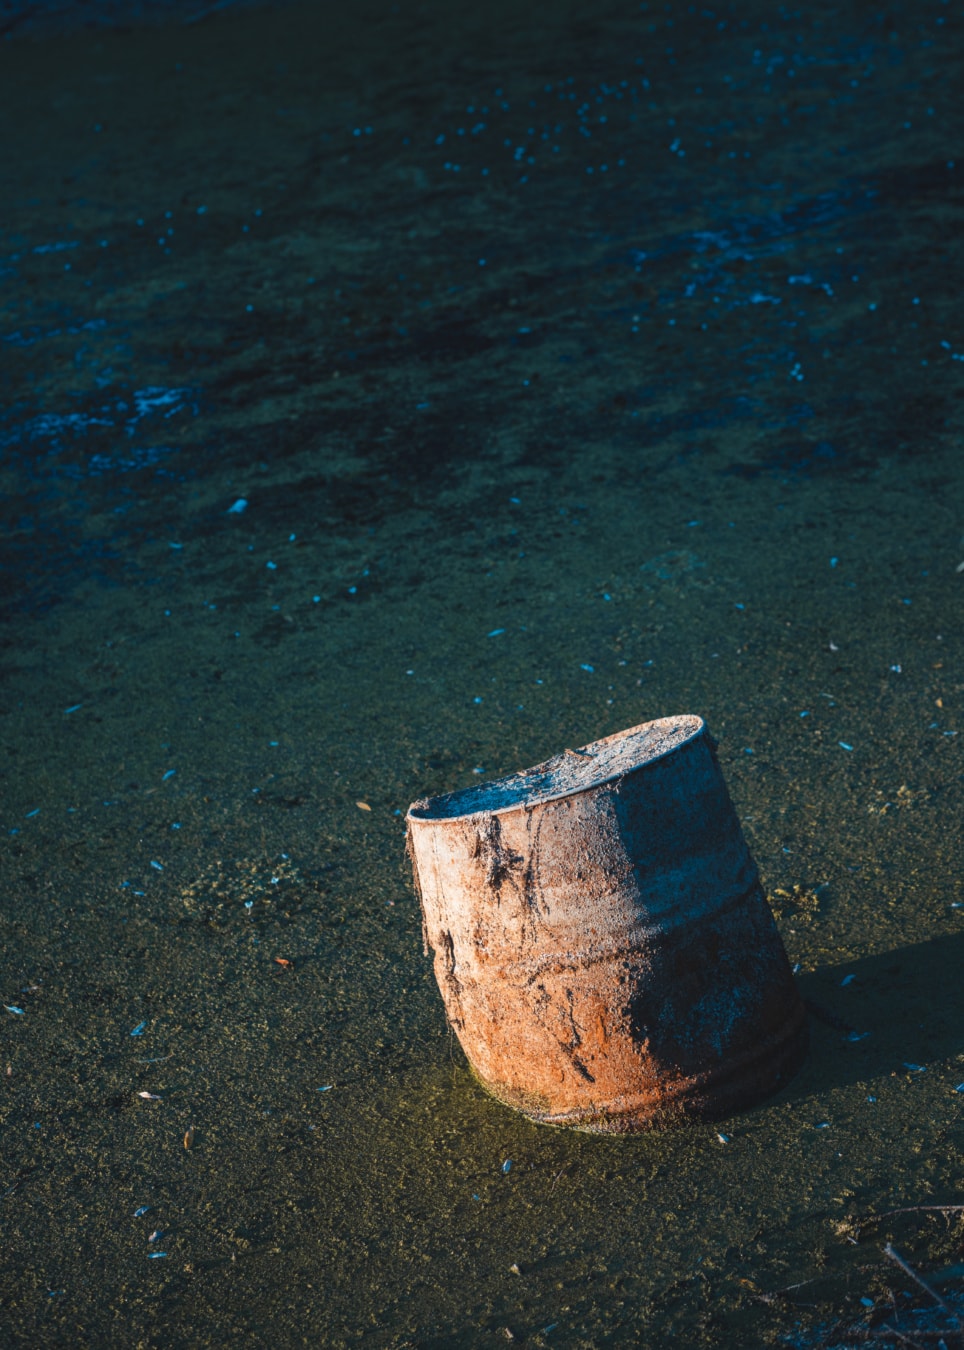 barrel, water pollution, garbage, metal, pollution, water system, container, water, rust, old